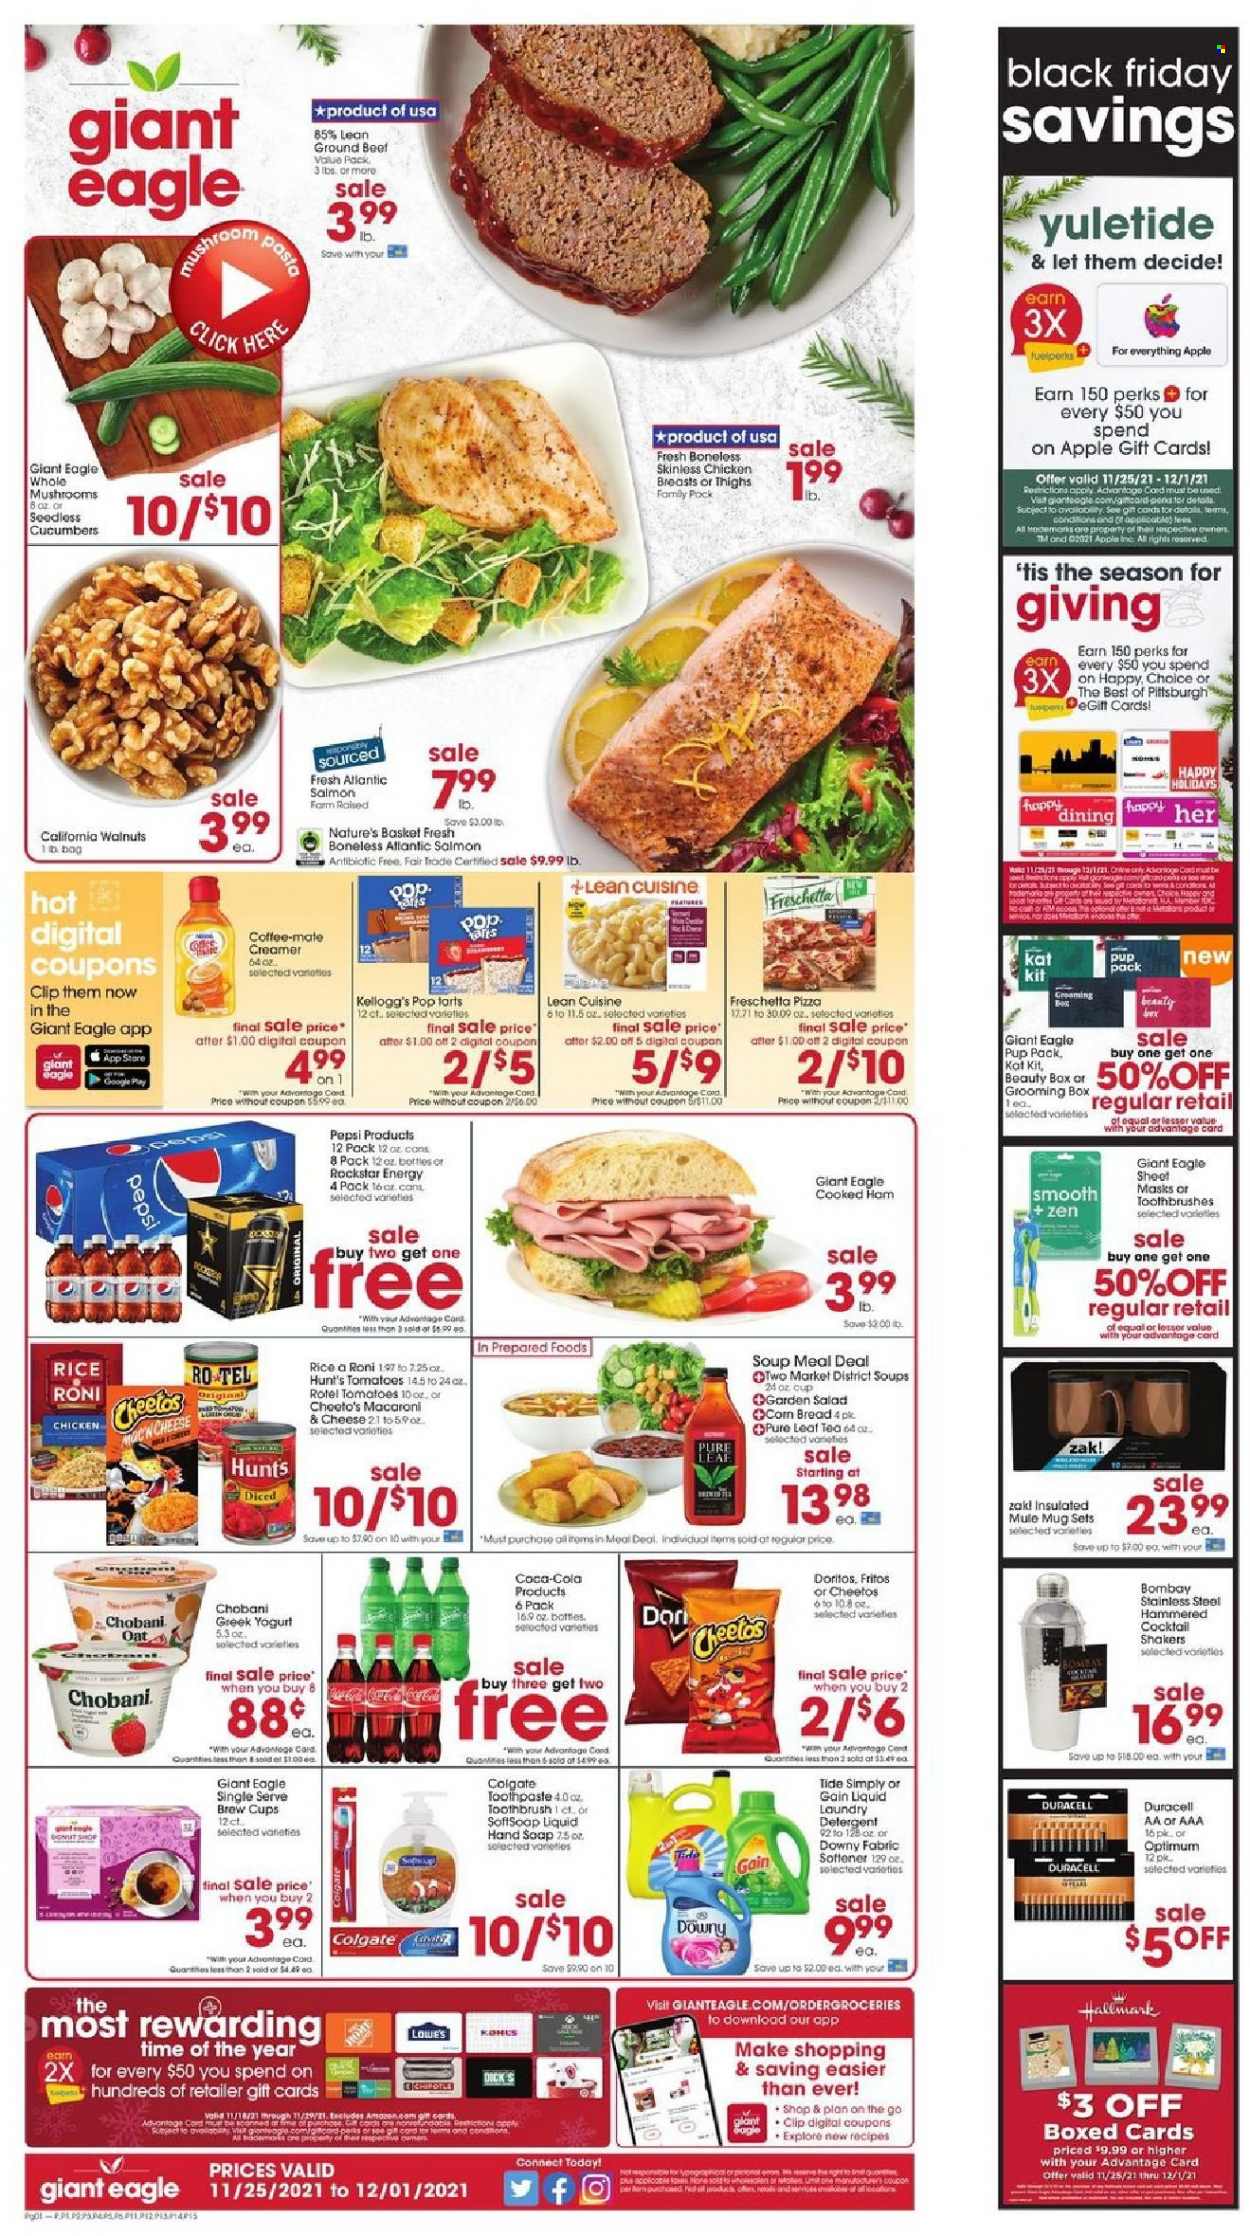 thumbnail - Giant Eagle Flyer - 11/25/2021 - 12/01/2021 - Sales products - bread, salad, salmon, macaroni & cheese, pizza, soup, Lean Cuisine, cooked ham, ham, greek yoghurt, yoghurt, Chobani, Coffee-Mate, creamer, Kellogg's, Doritos, Fritos, Cheetos, oats, Koo, rice, walnuts, Coca-Cola, Pepsi, Rockstar, Pure Leaf, gin, beef meat, ground beef, detergent, Gain, Tide, laundry detergent, Downy Laundry, Softsoap, hand soap, soap, Colgate, toothbrush, toothpaste, beauty box, basket, mug, boxed card, Duracell, Optimum. Page 1.